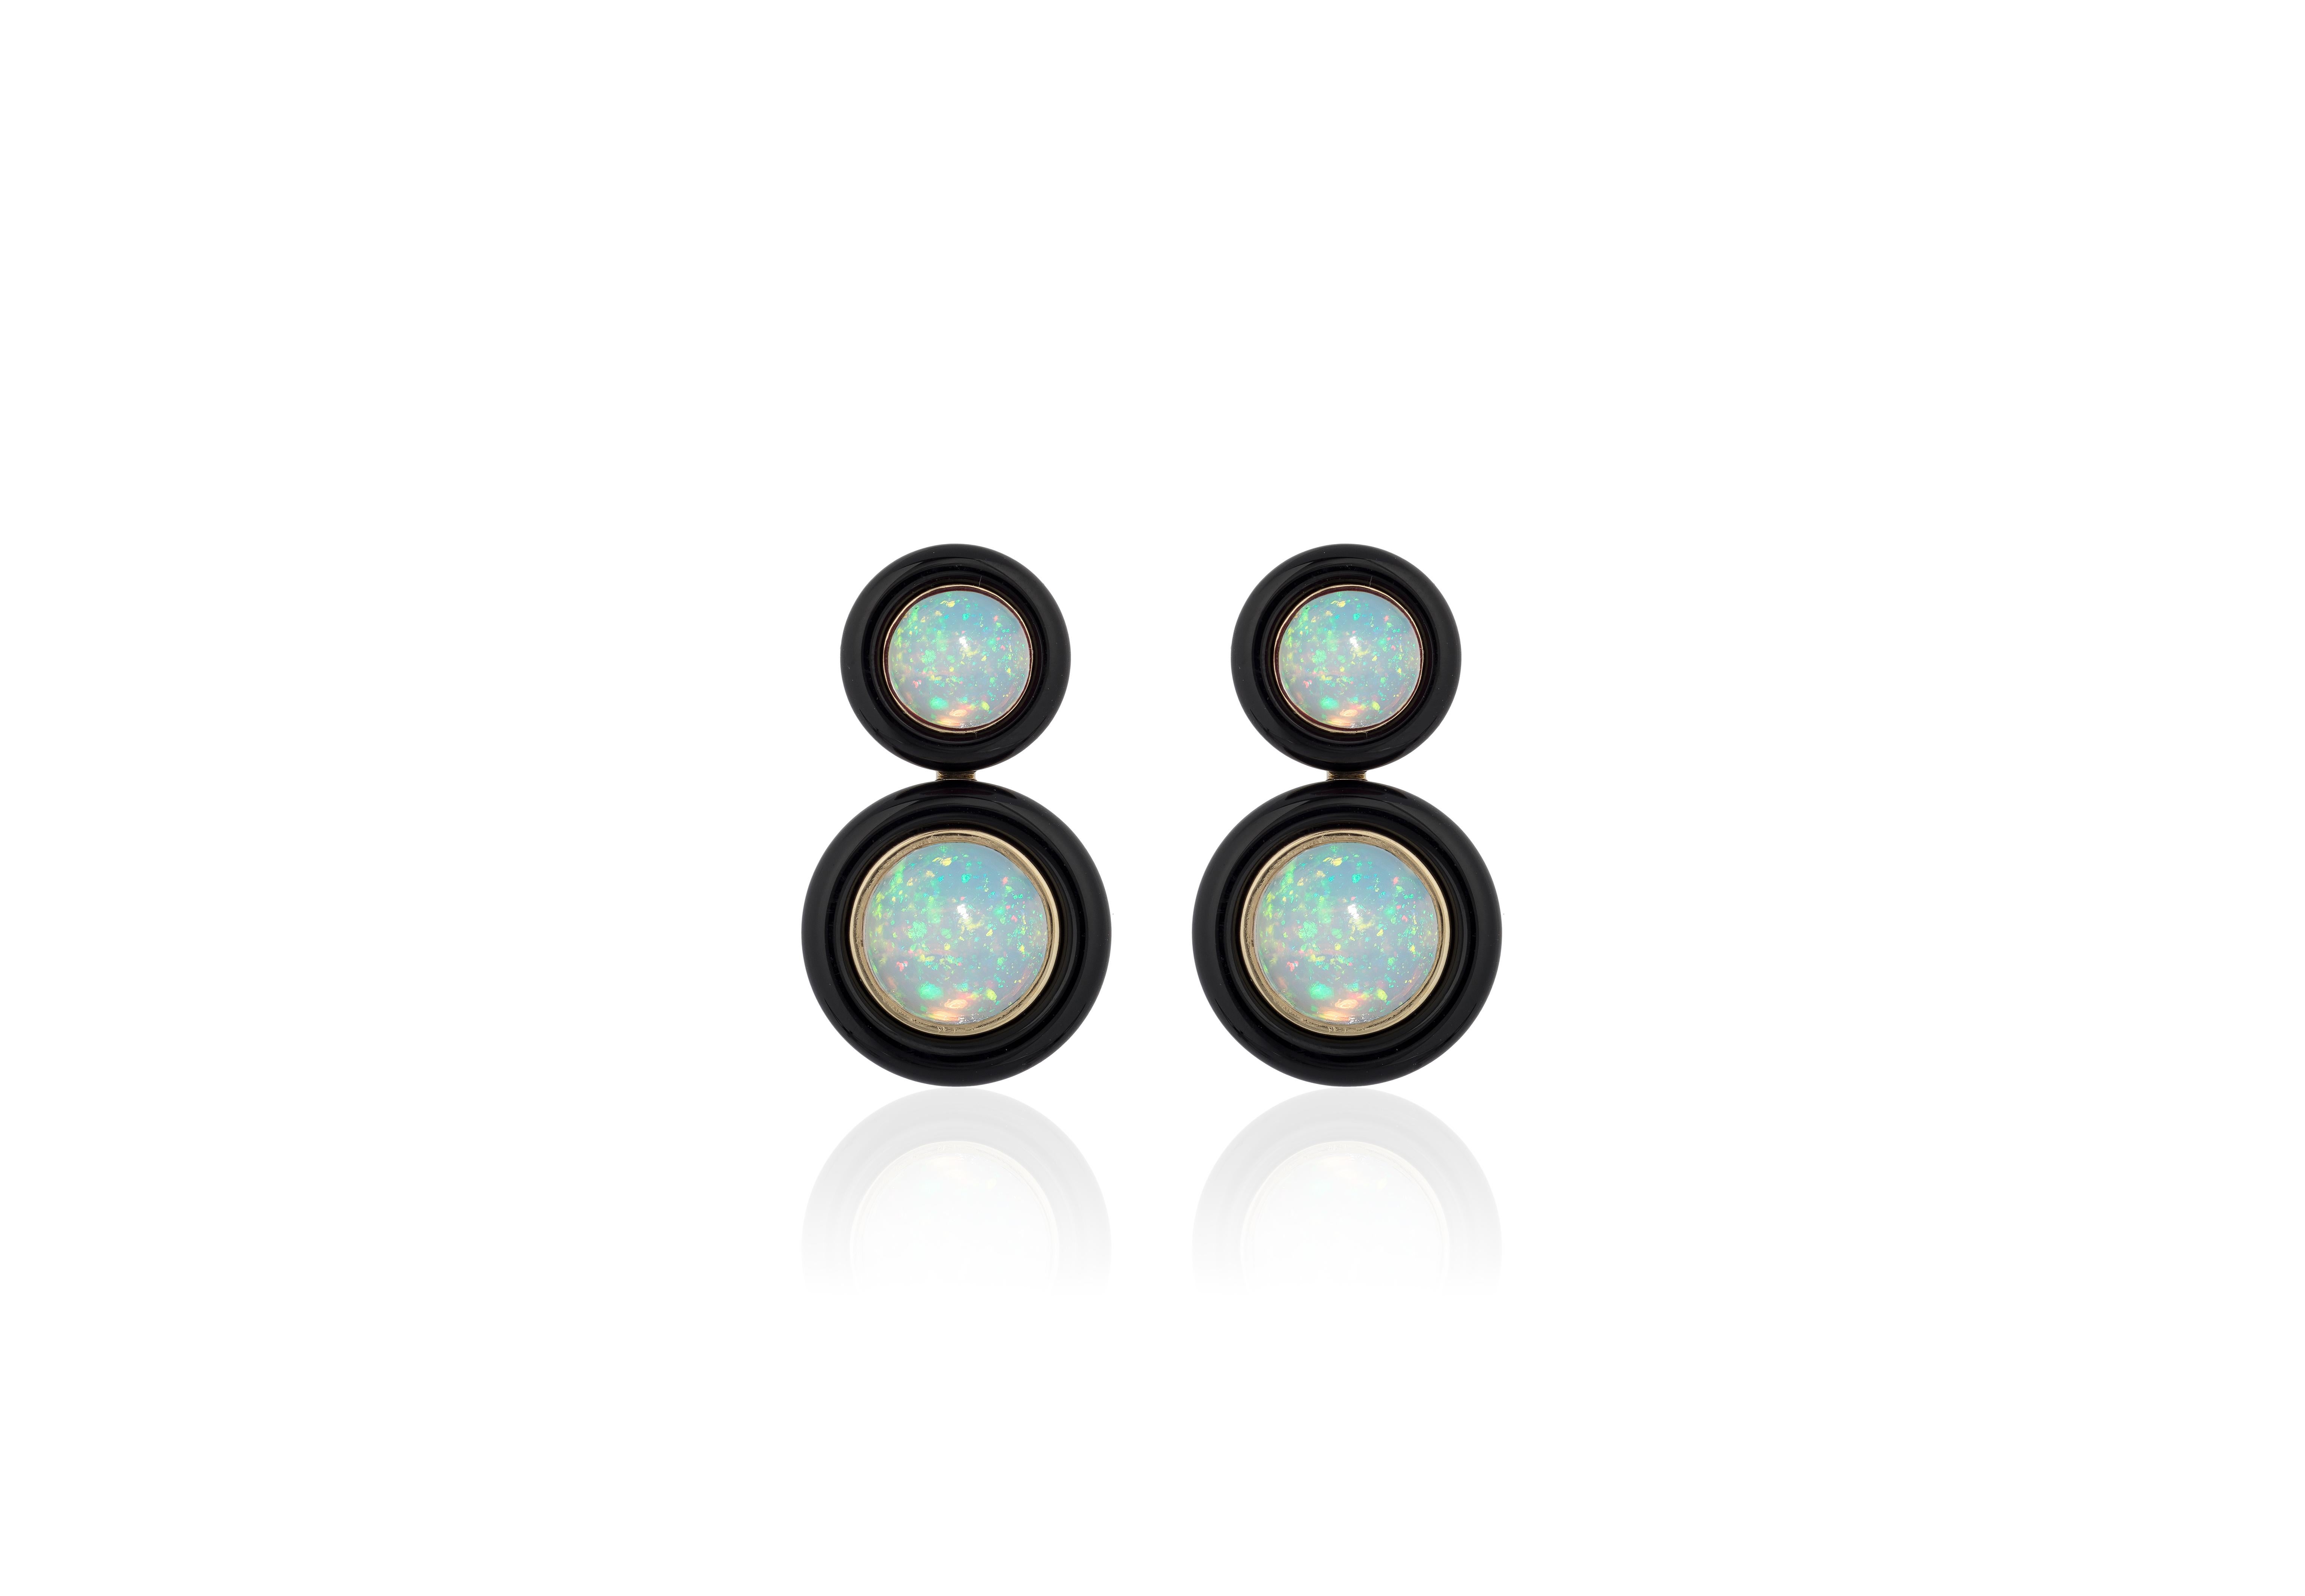 2 Row Round Opal Earrings with Onyx ring Surround in 18K Yellow Gold, from 'Limited Edition'.
These limited edition items are just that! Limited! 
Feel the exclusiveness in every piece from this collection and Feel the love in these limited edition